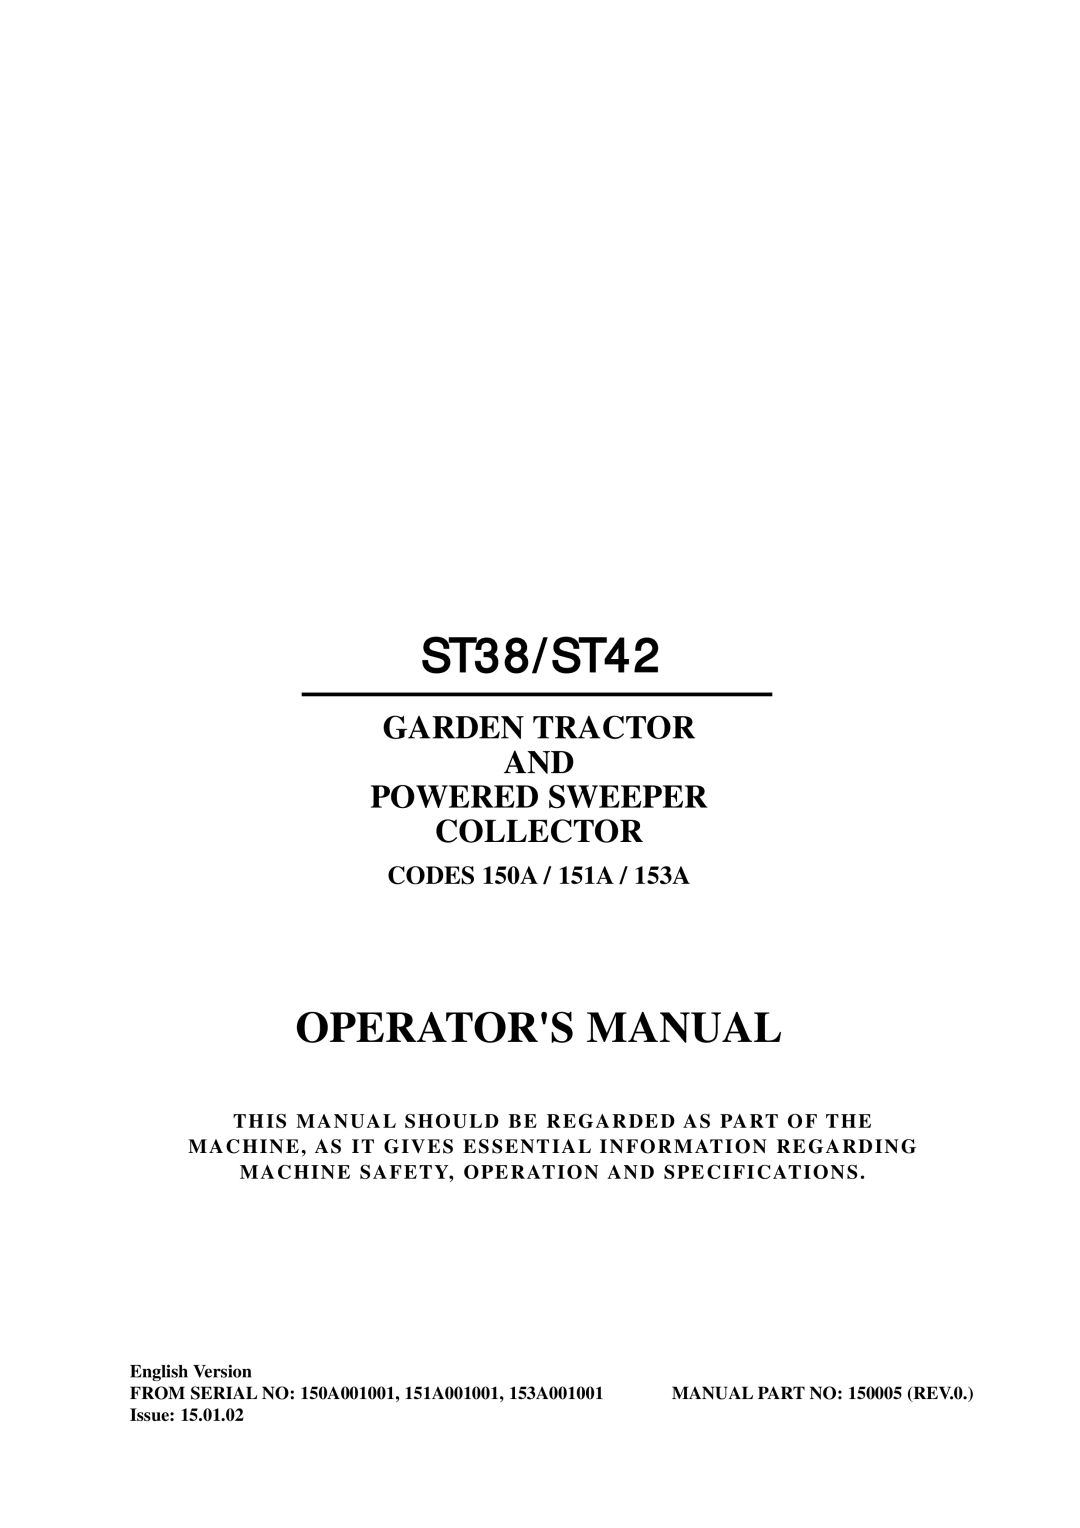 Hayter Mowers SST38/ST42 specifications Operators Manual, CODES 150A / 151A / 153A, English Version, Issue 